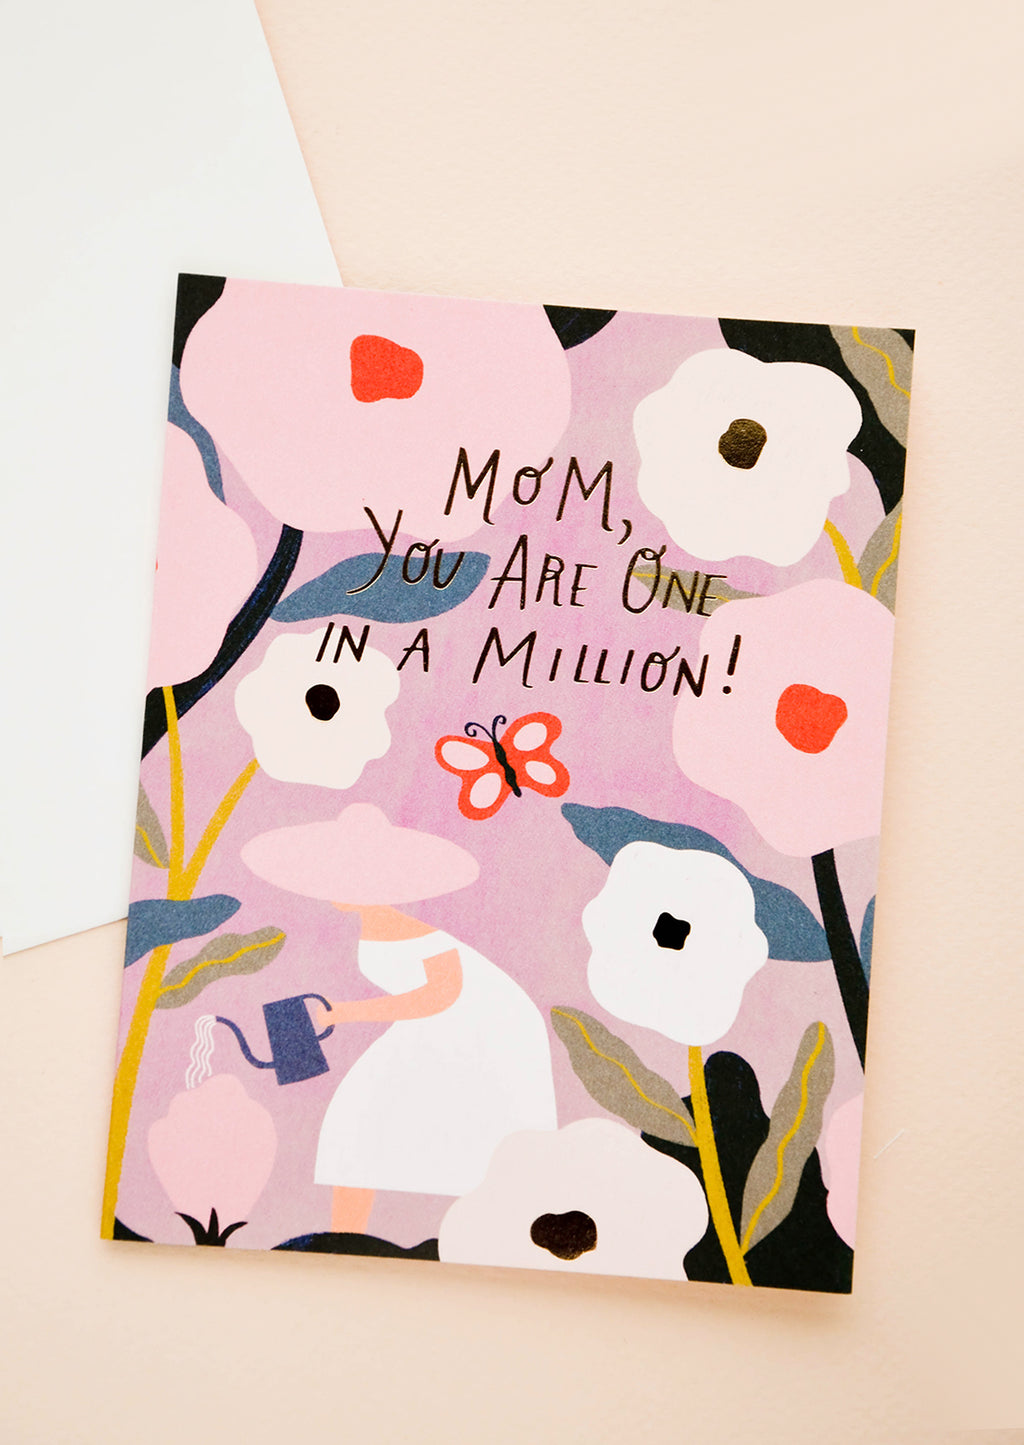 1: Greeting card with gardening graphics, text reads "Mom You Are One In A Million!"